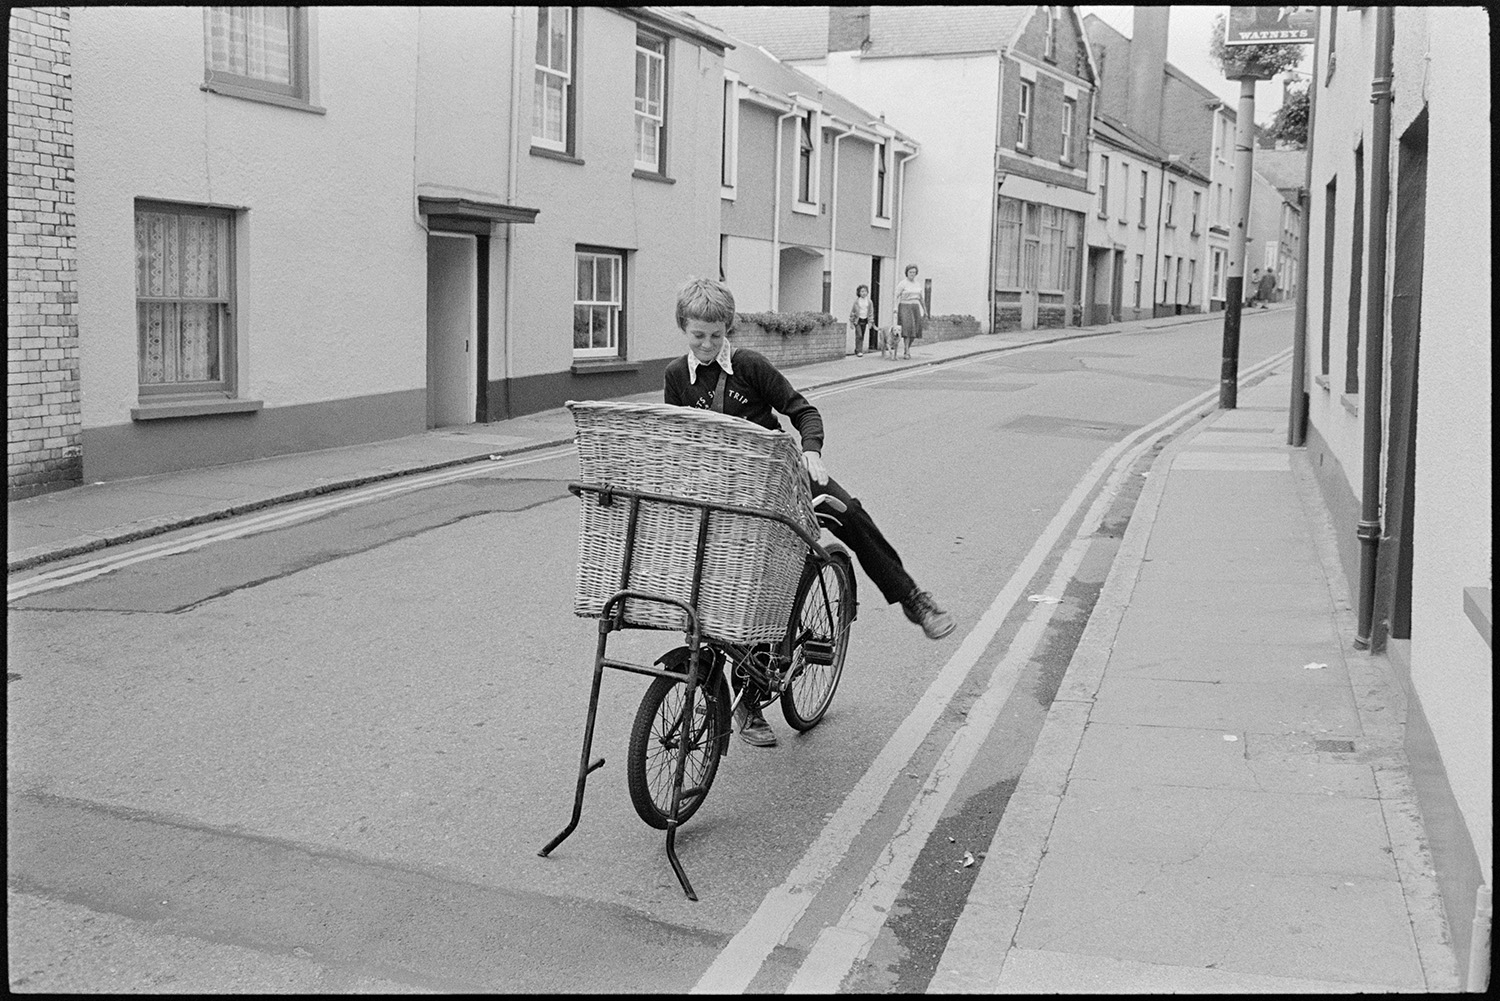 Delivery boy on bicycle with basket in street.
[A delivery boy on a bicycle with a large basket, in Well Street, Torrington.]